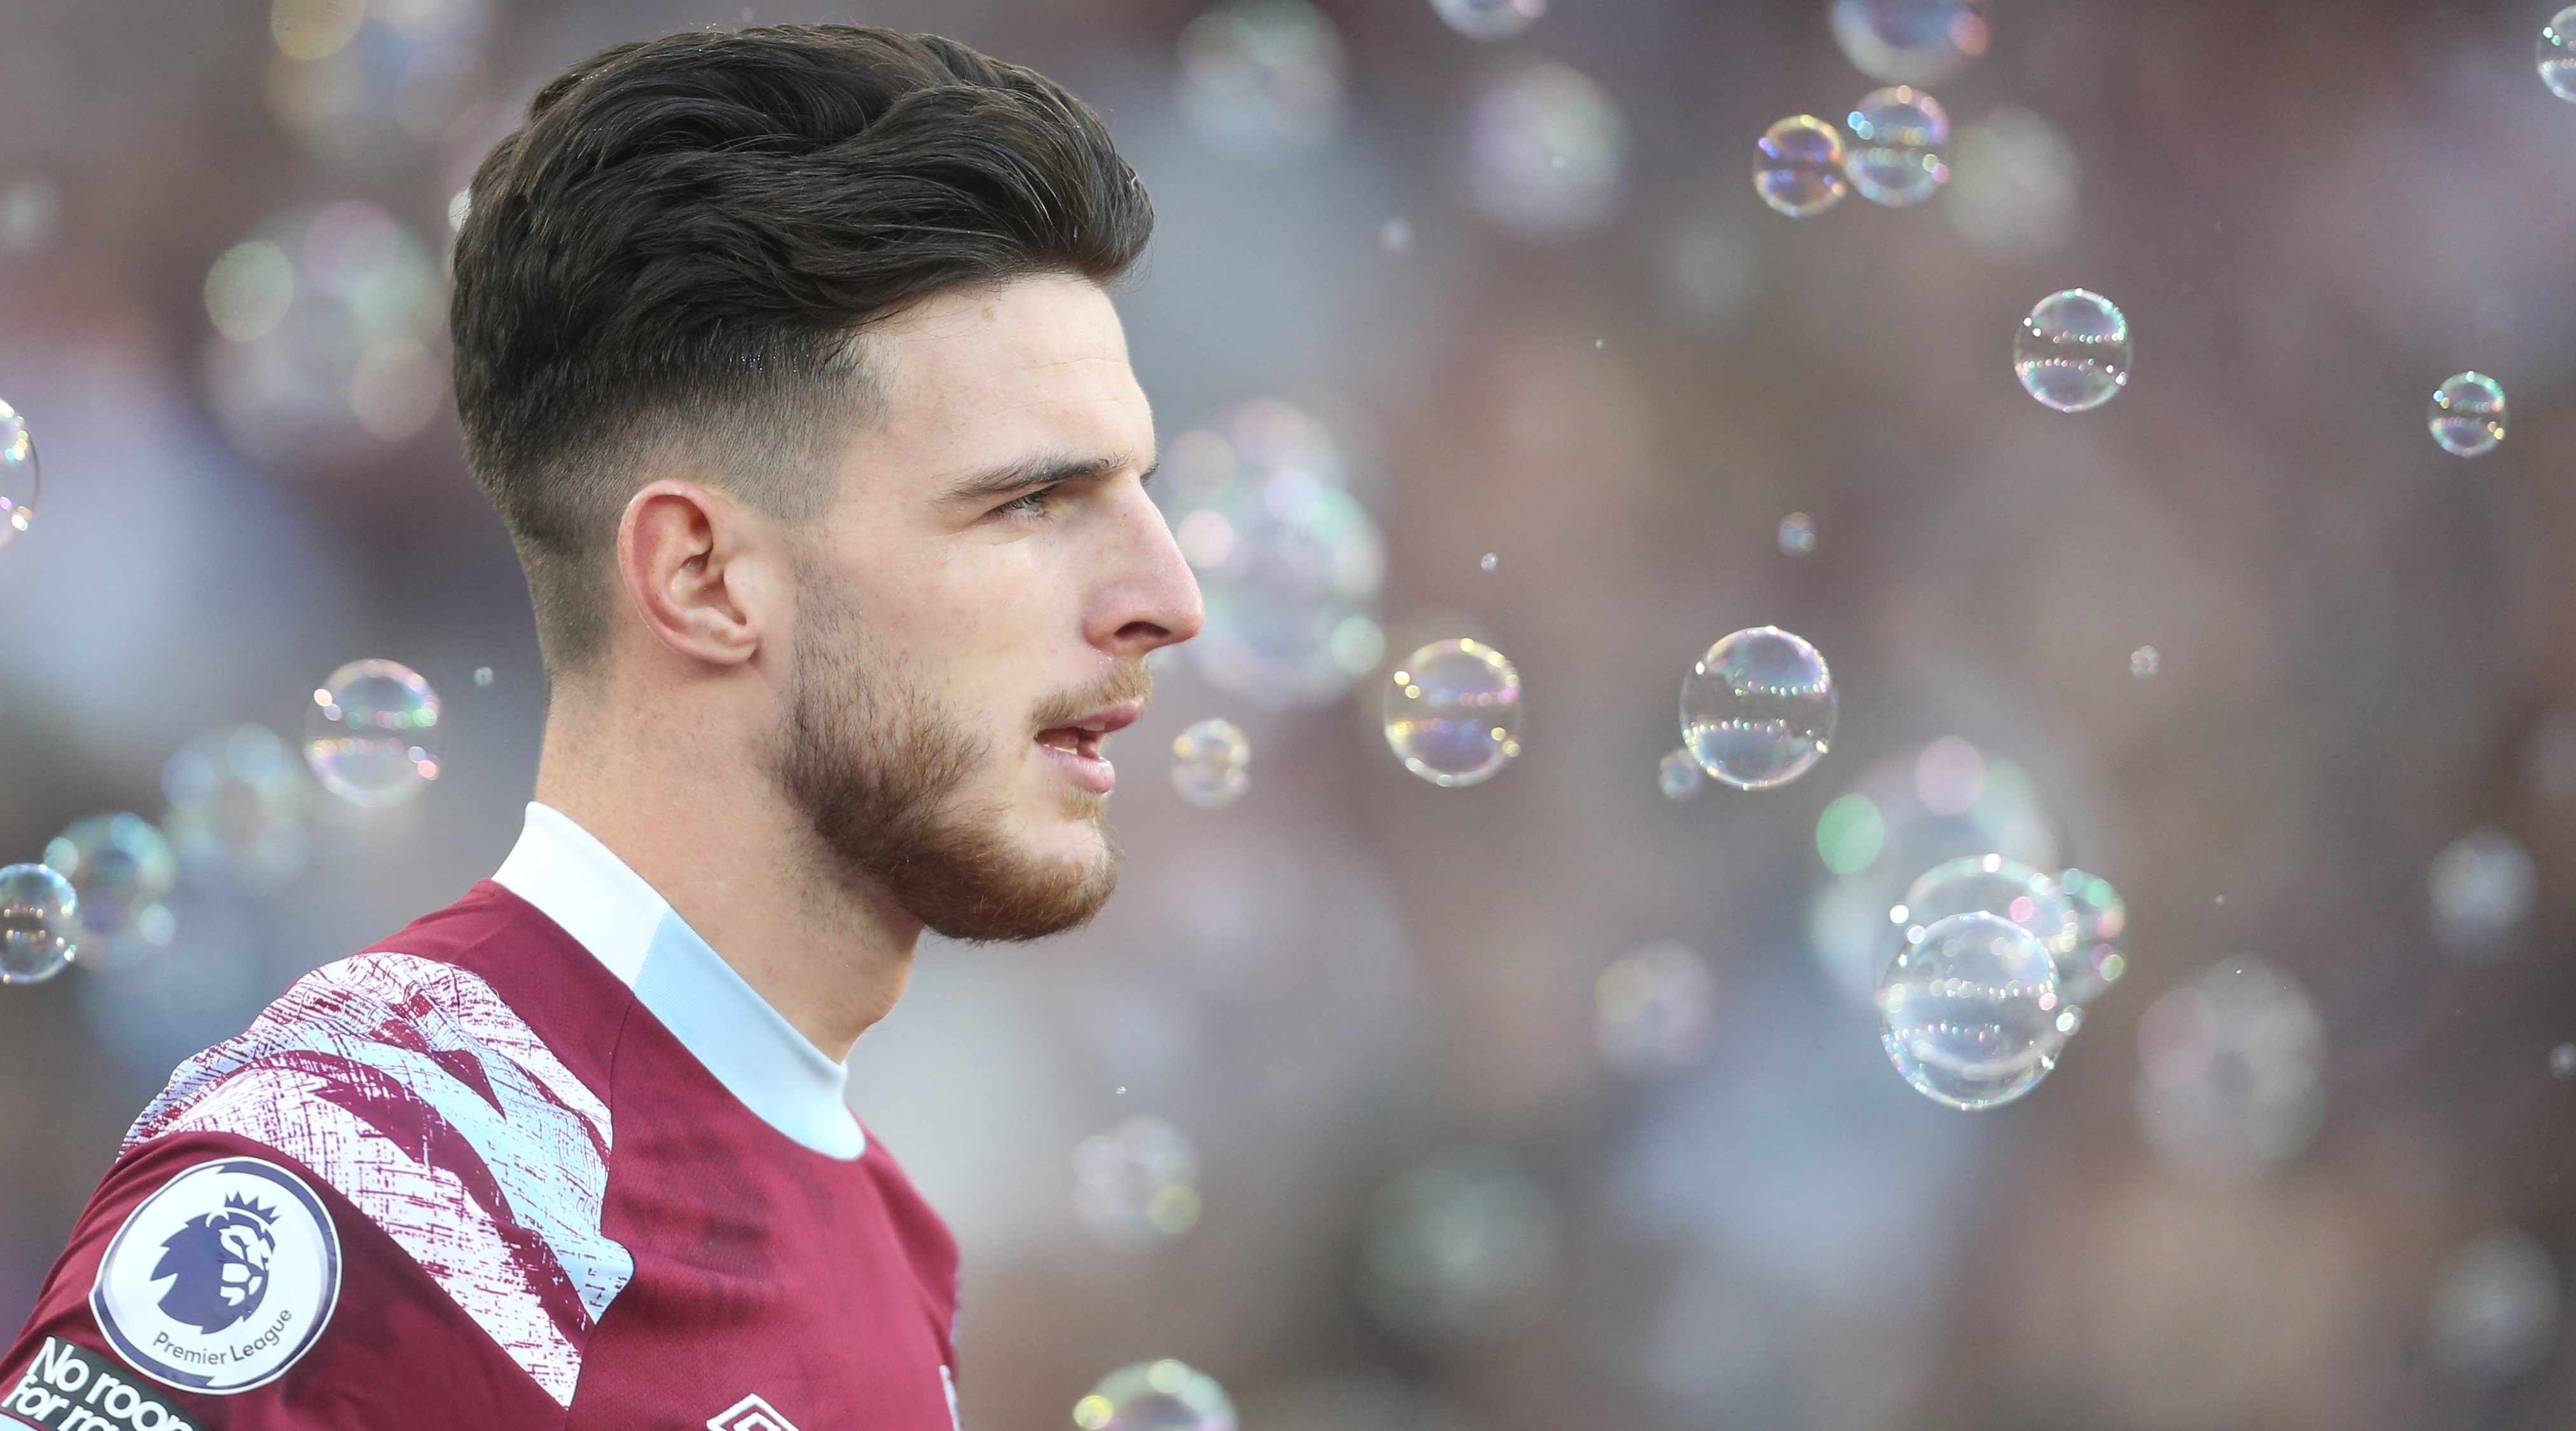 Declan Rice of West Ham United, photographed in October 2022